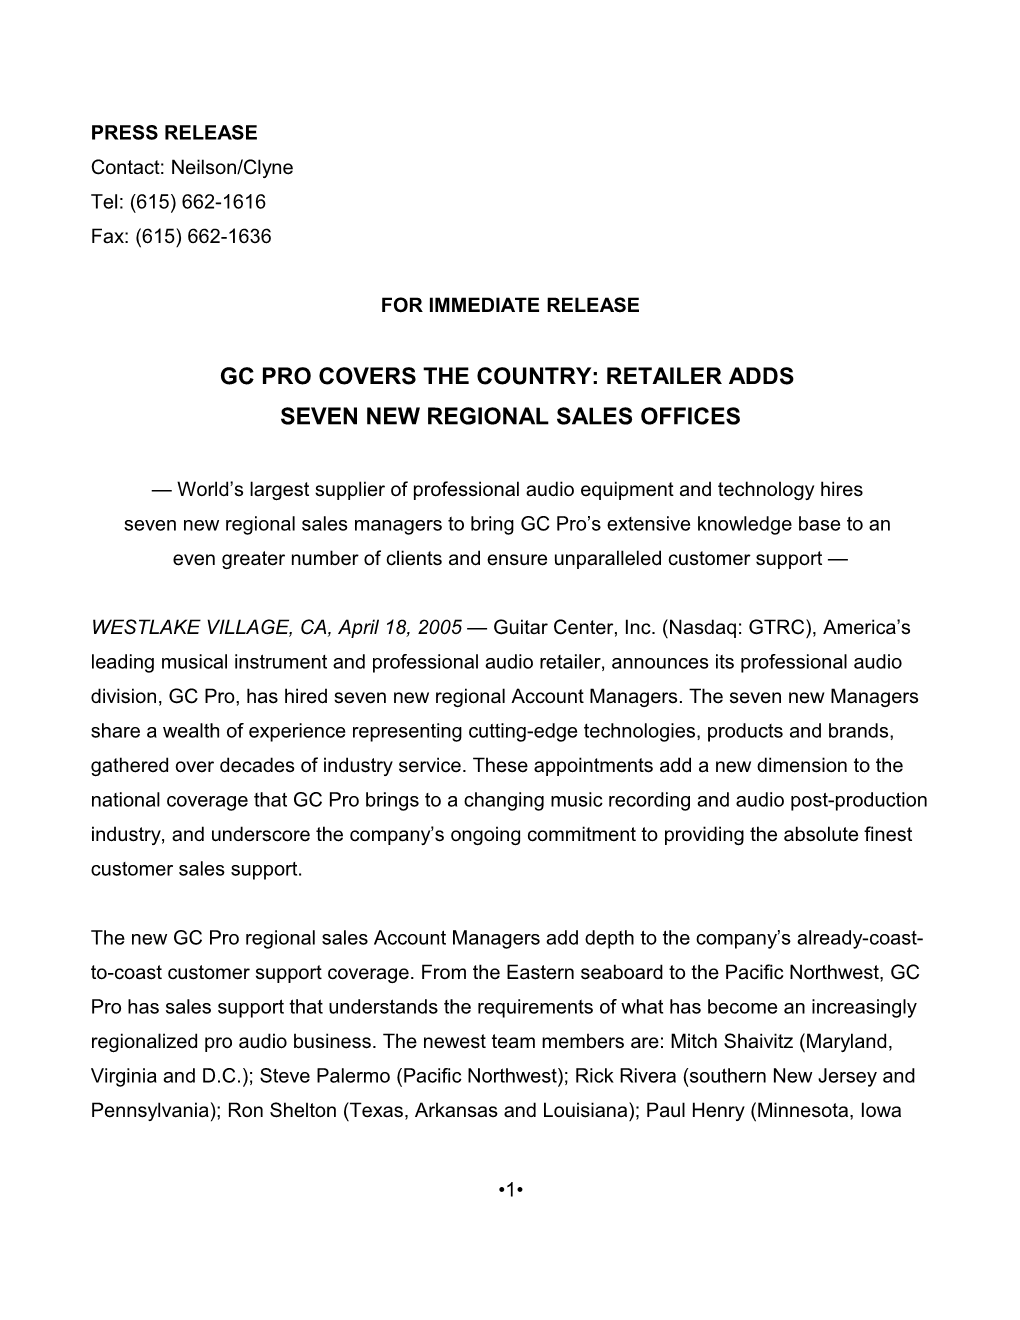 Gc Pro Covers the Country: Retailer Adds